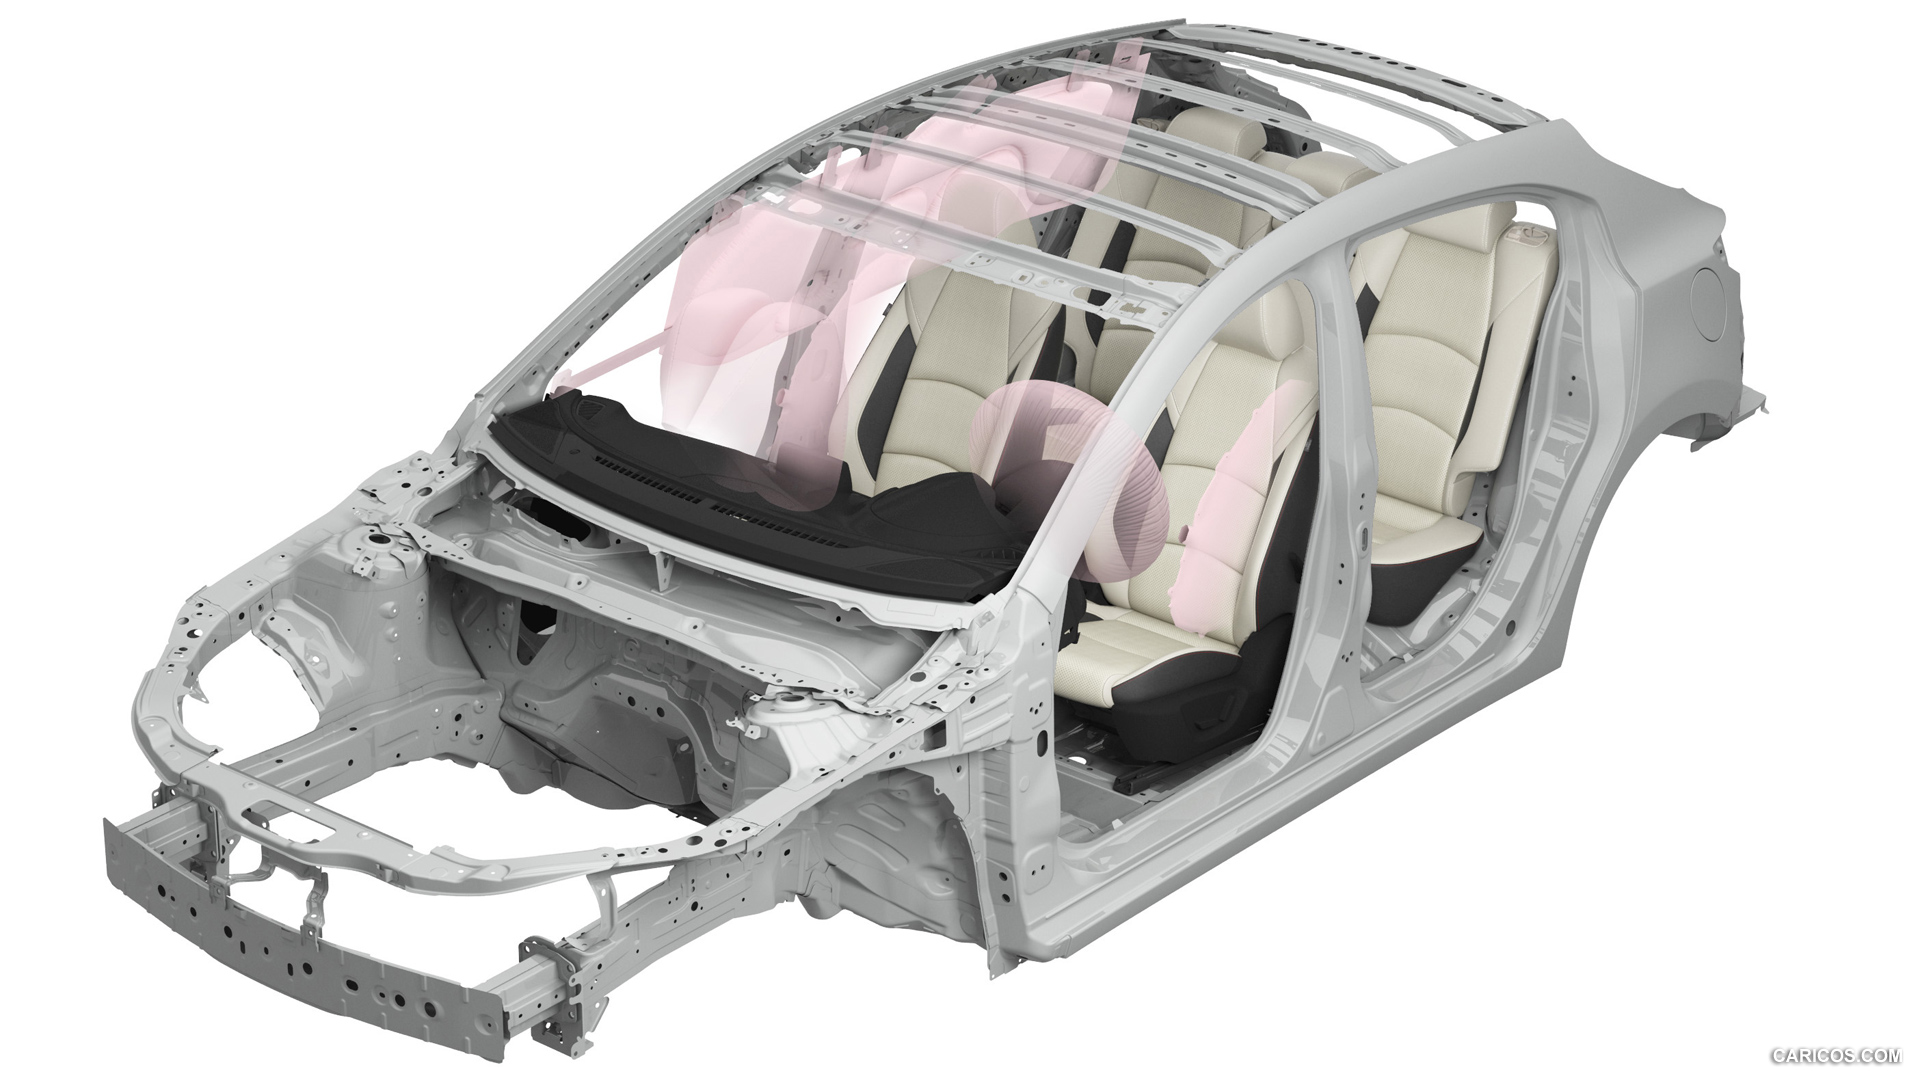 2014 Mazda3 Hatchback Body Structure - Technical Drawing, #197 of 204